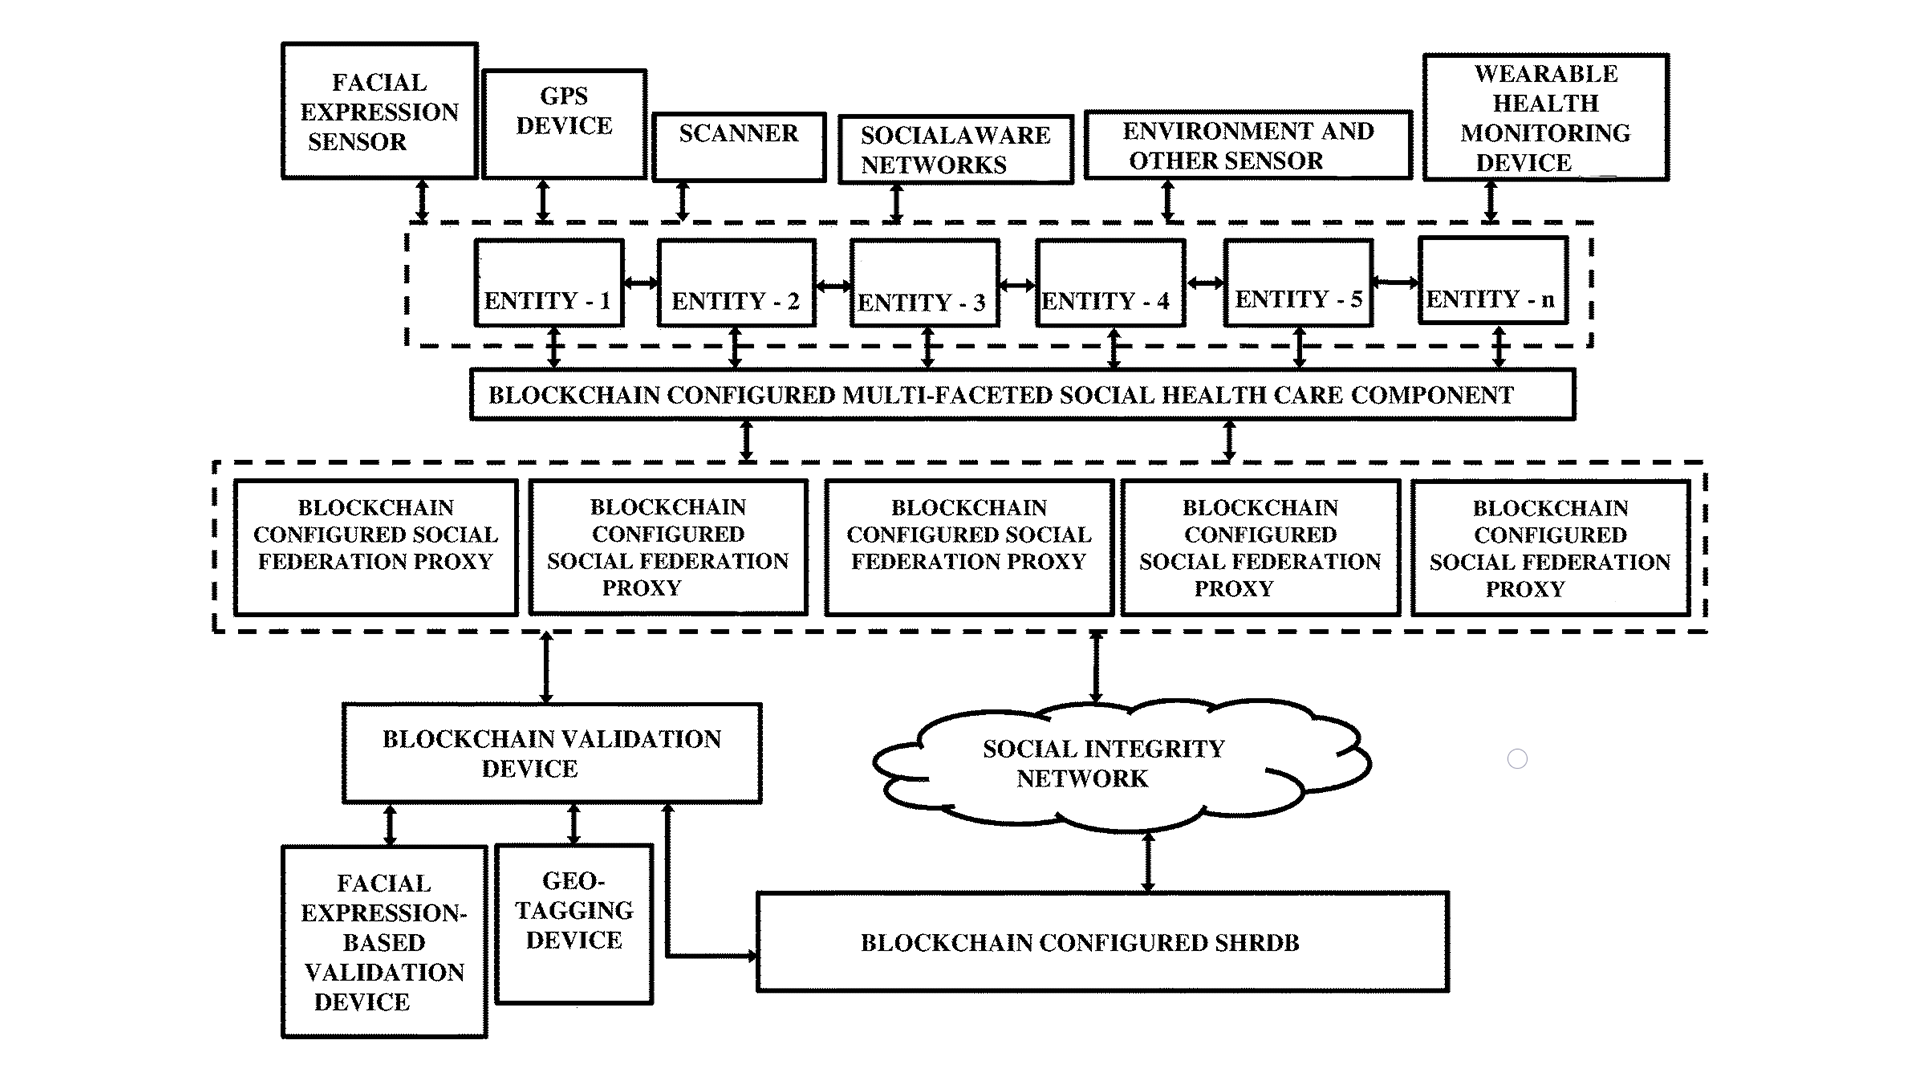 Device-Driven Social Integrity Network with Data Validation and Identity Verification